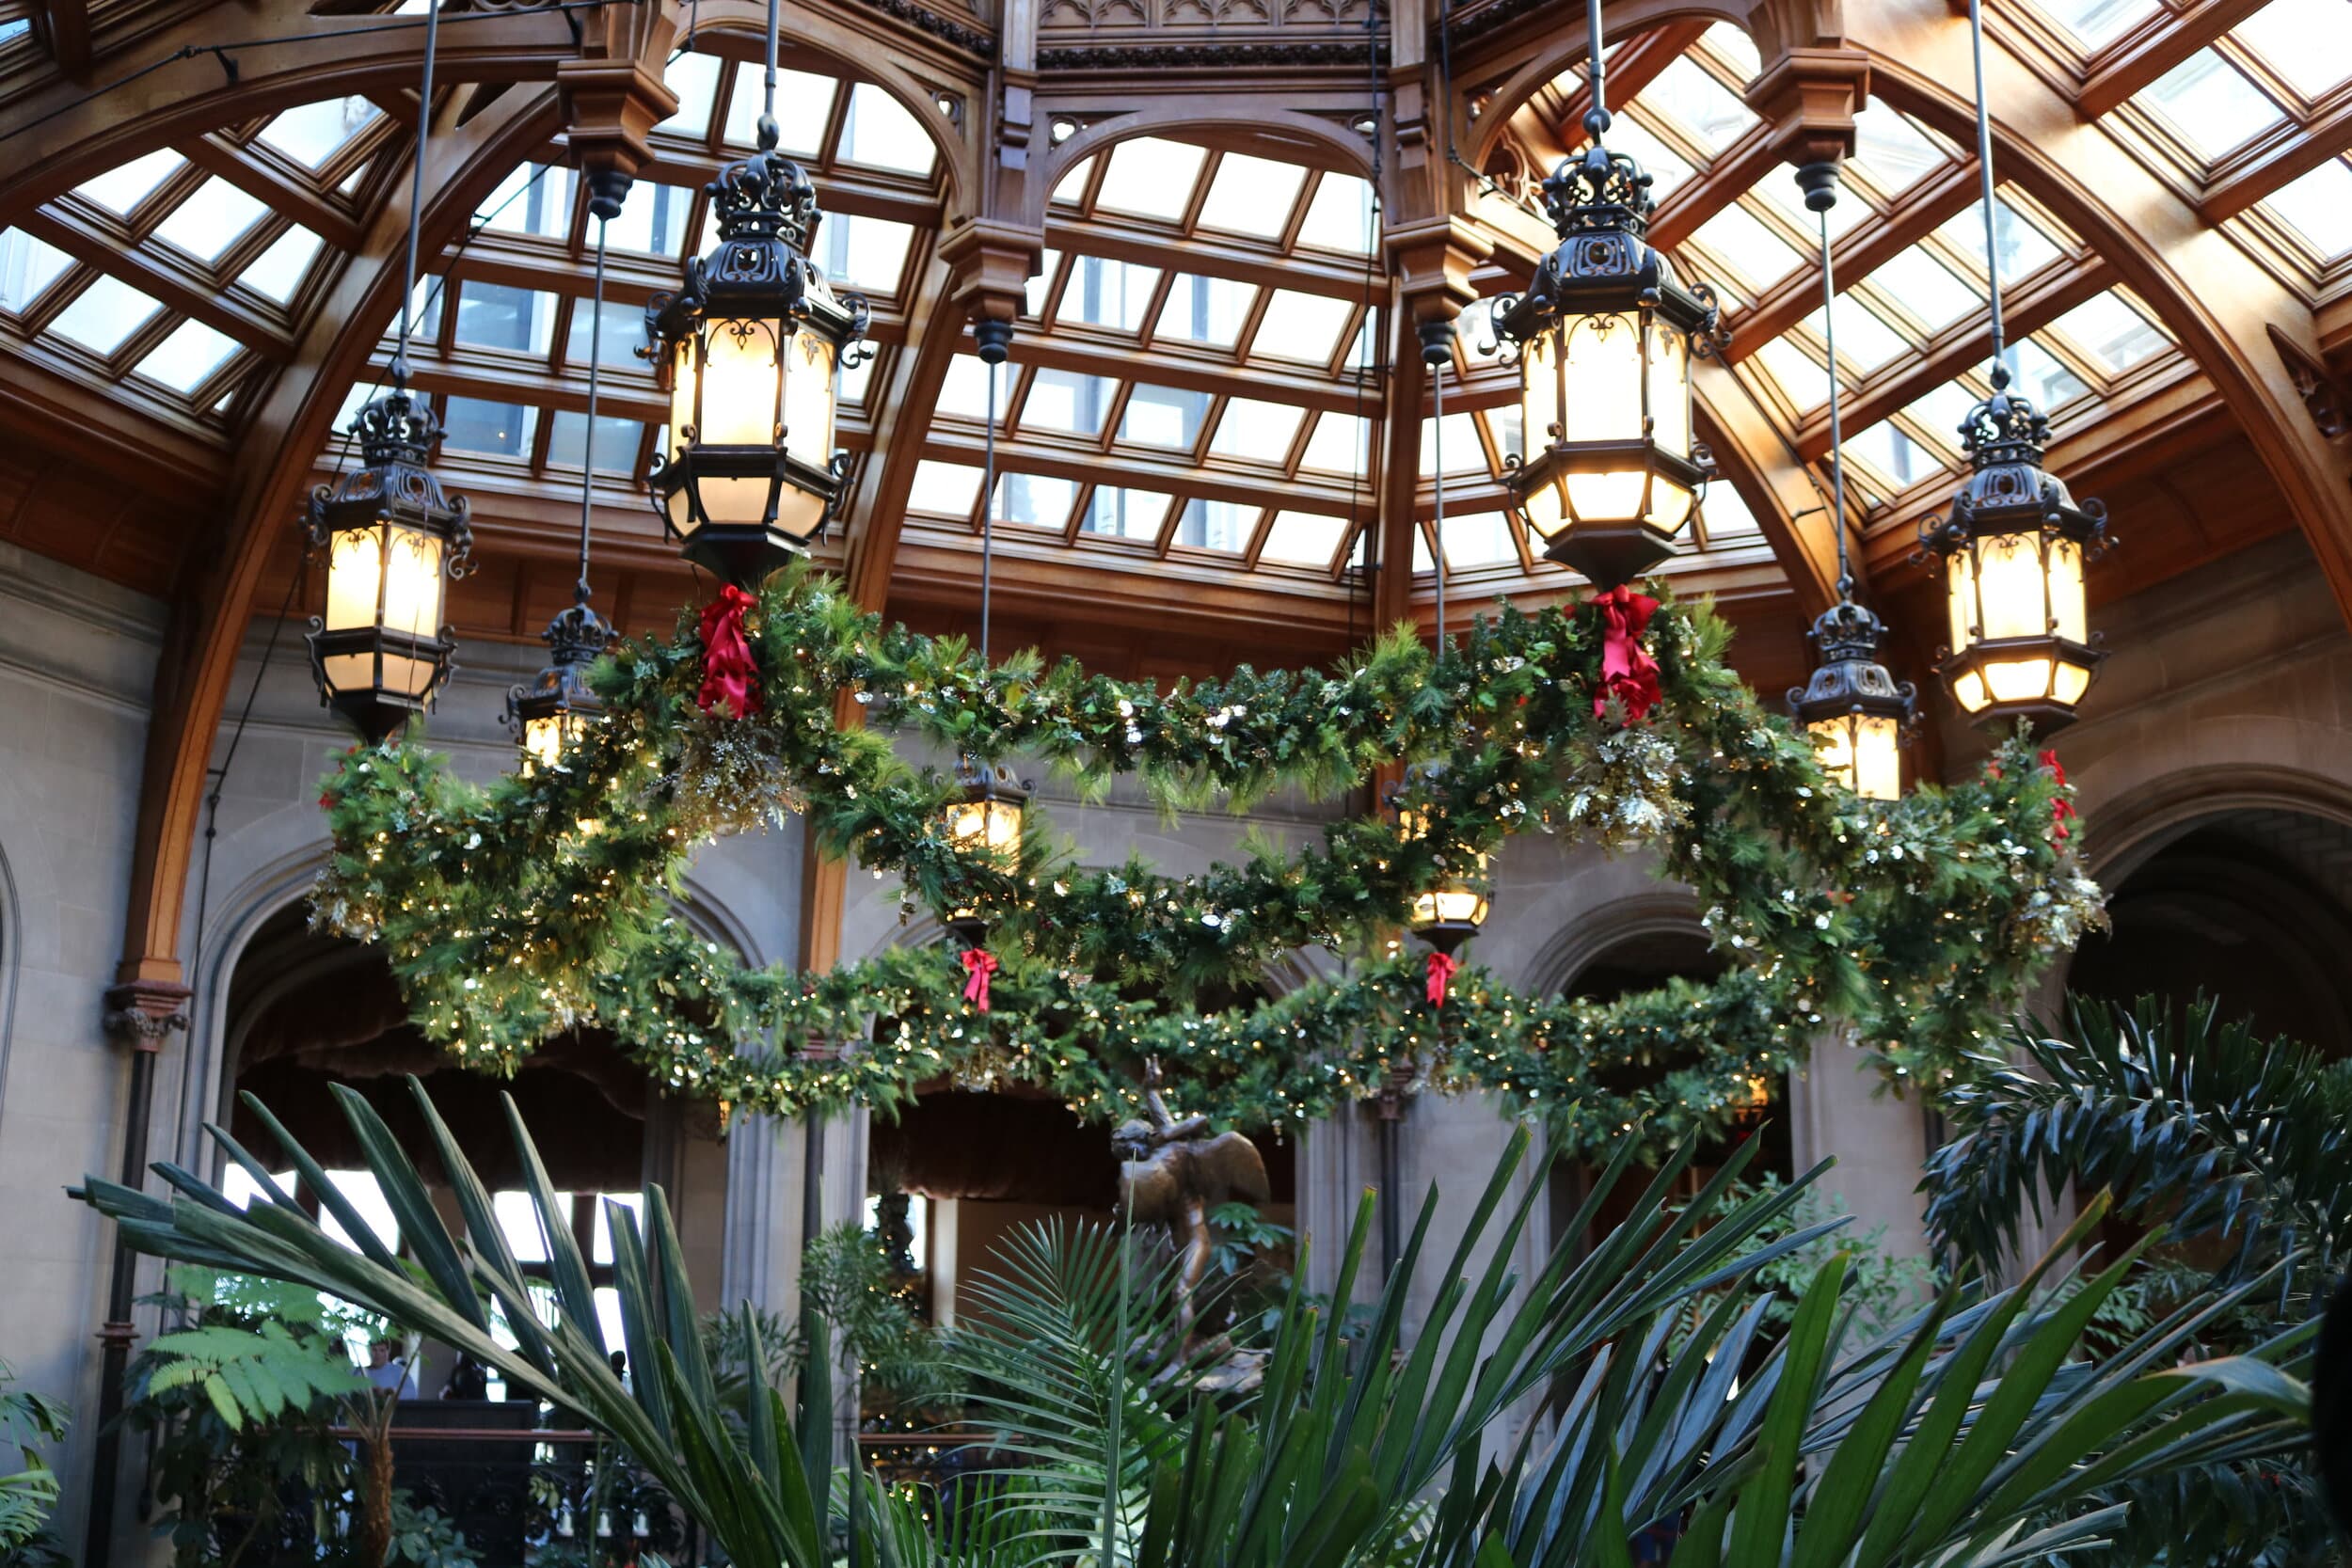 The Winter Garden: A glass roof that illuminates a fountain that sits below the glass ceiling.